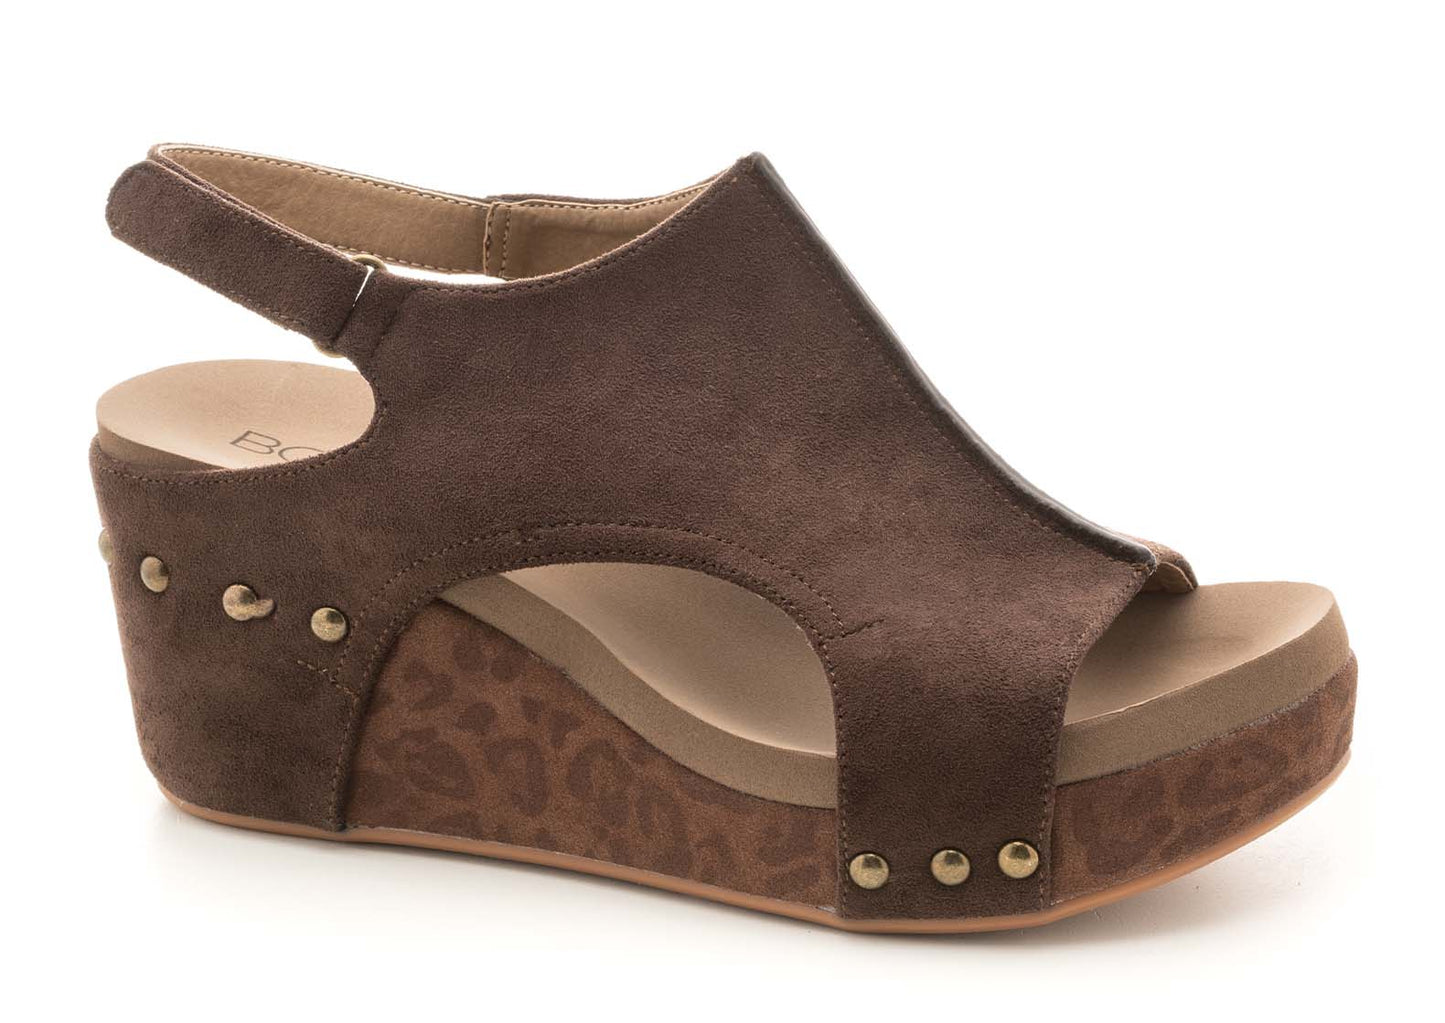 Corky's Brown Suede Wedge